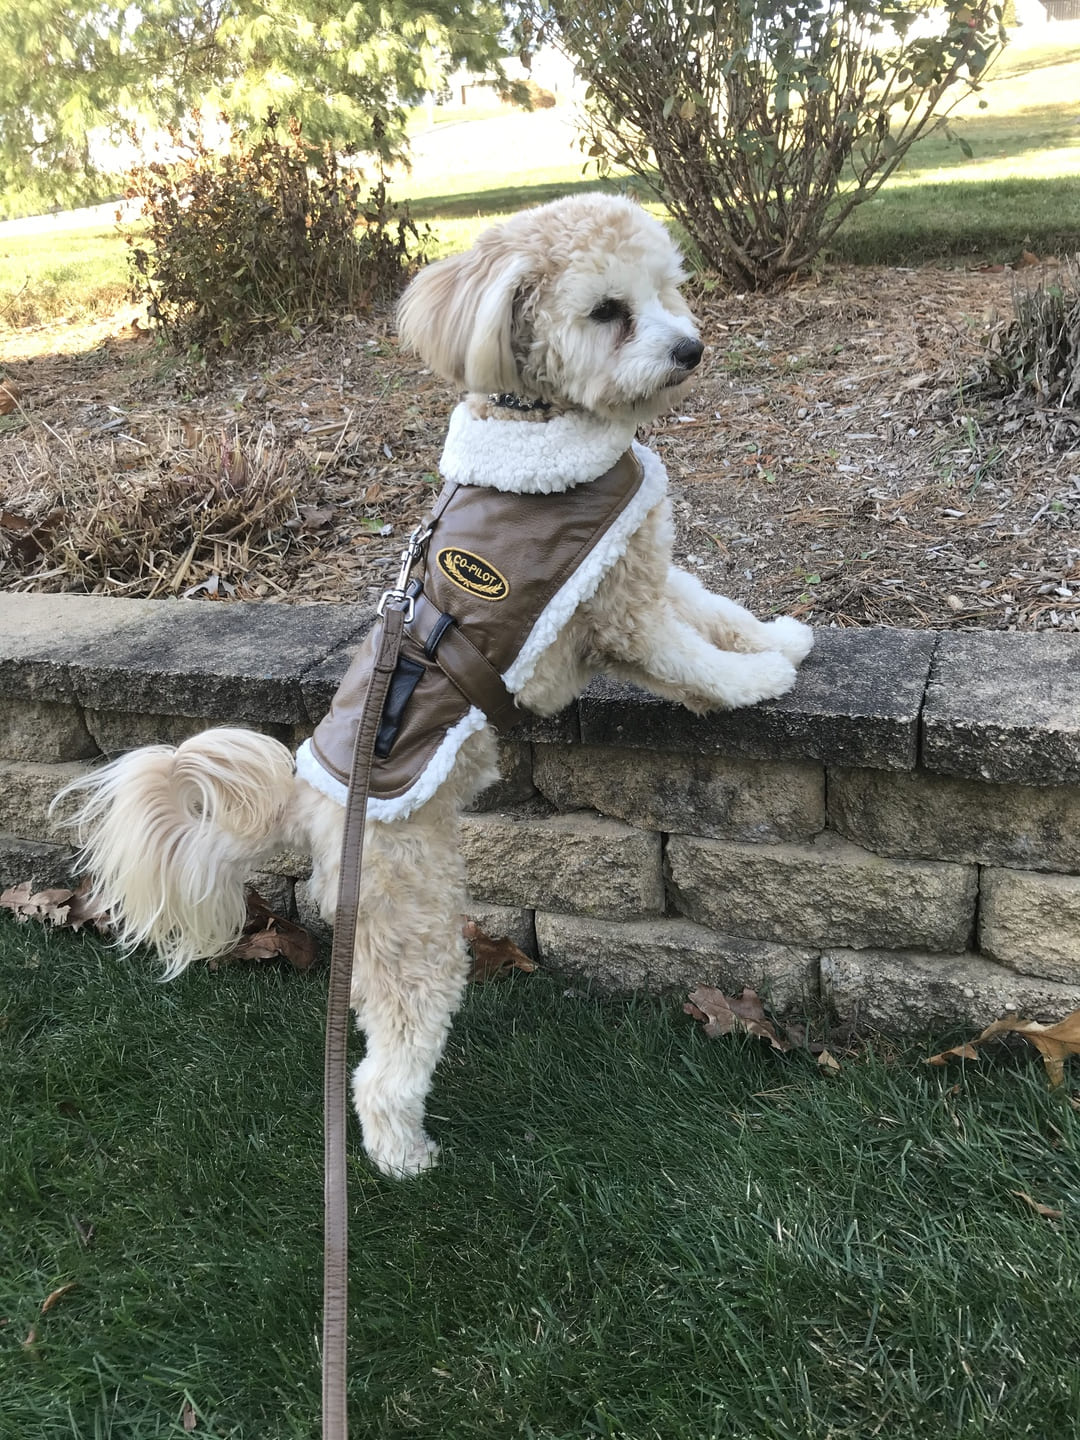 Dog Clothes, Dog Harnesses & Dog Outfits